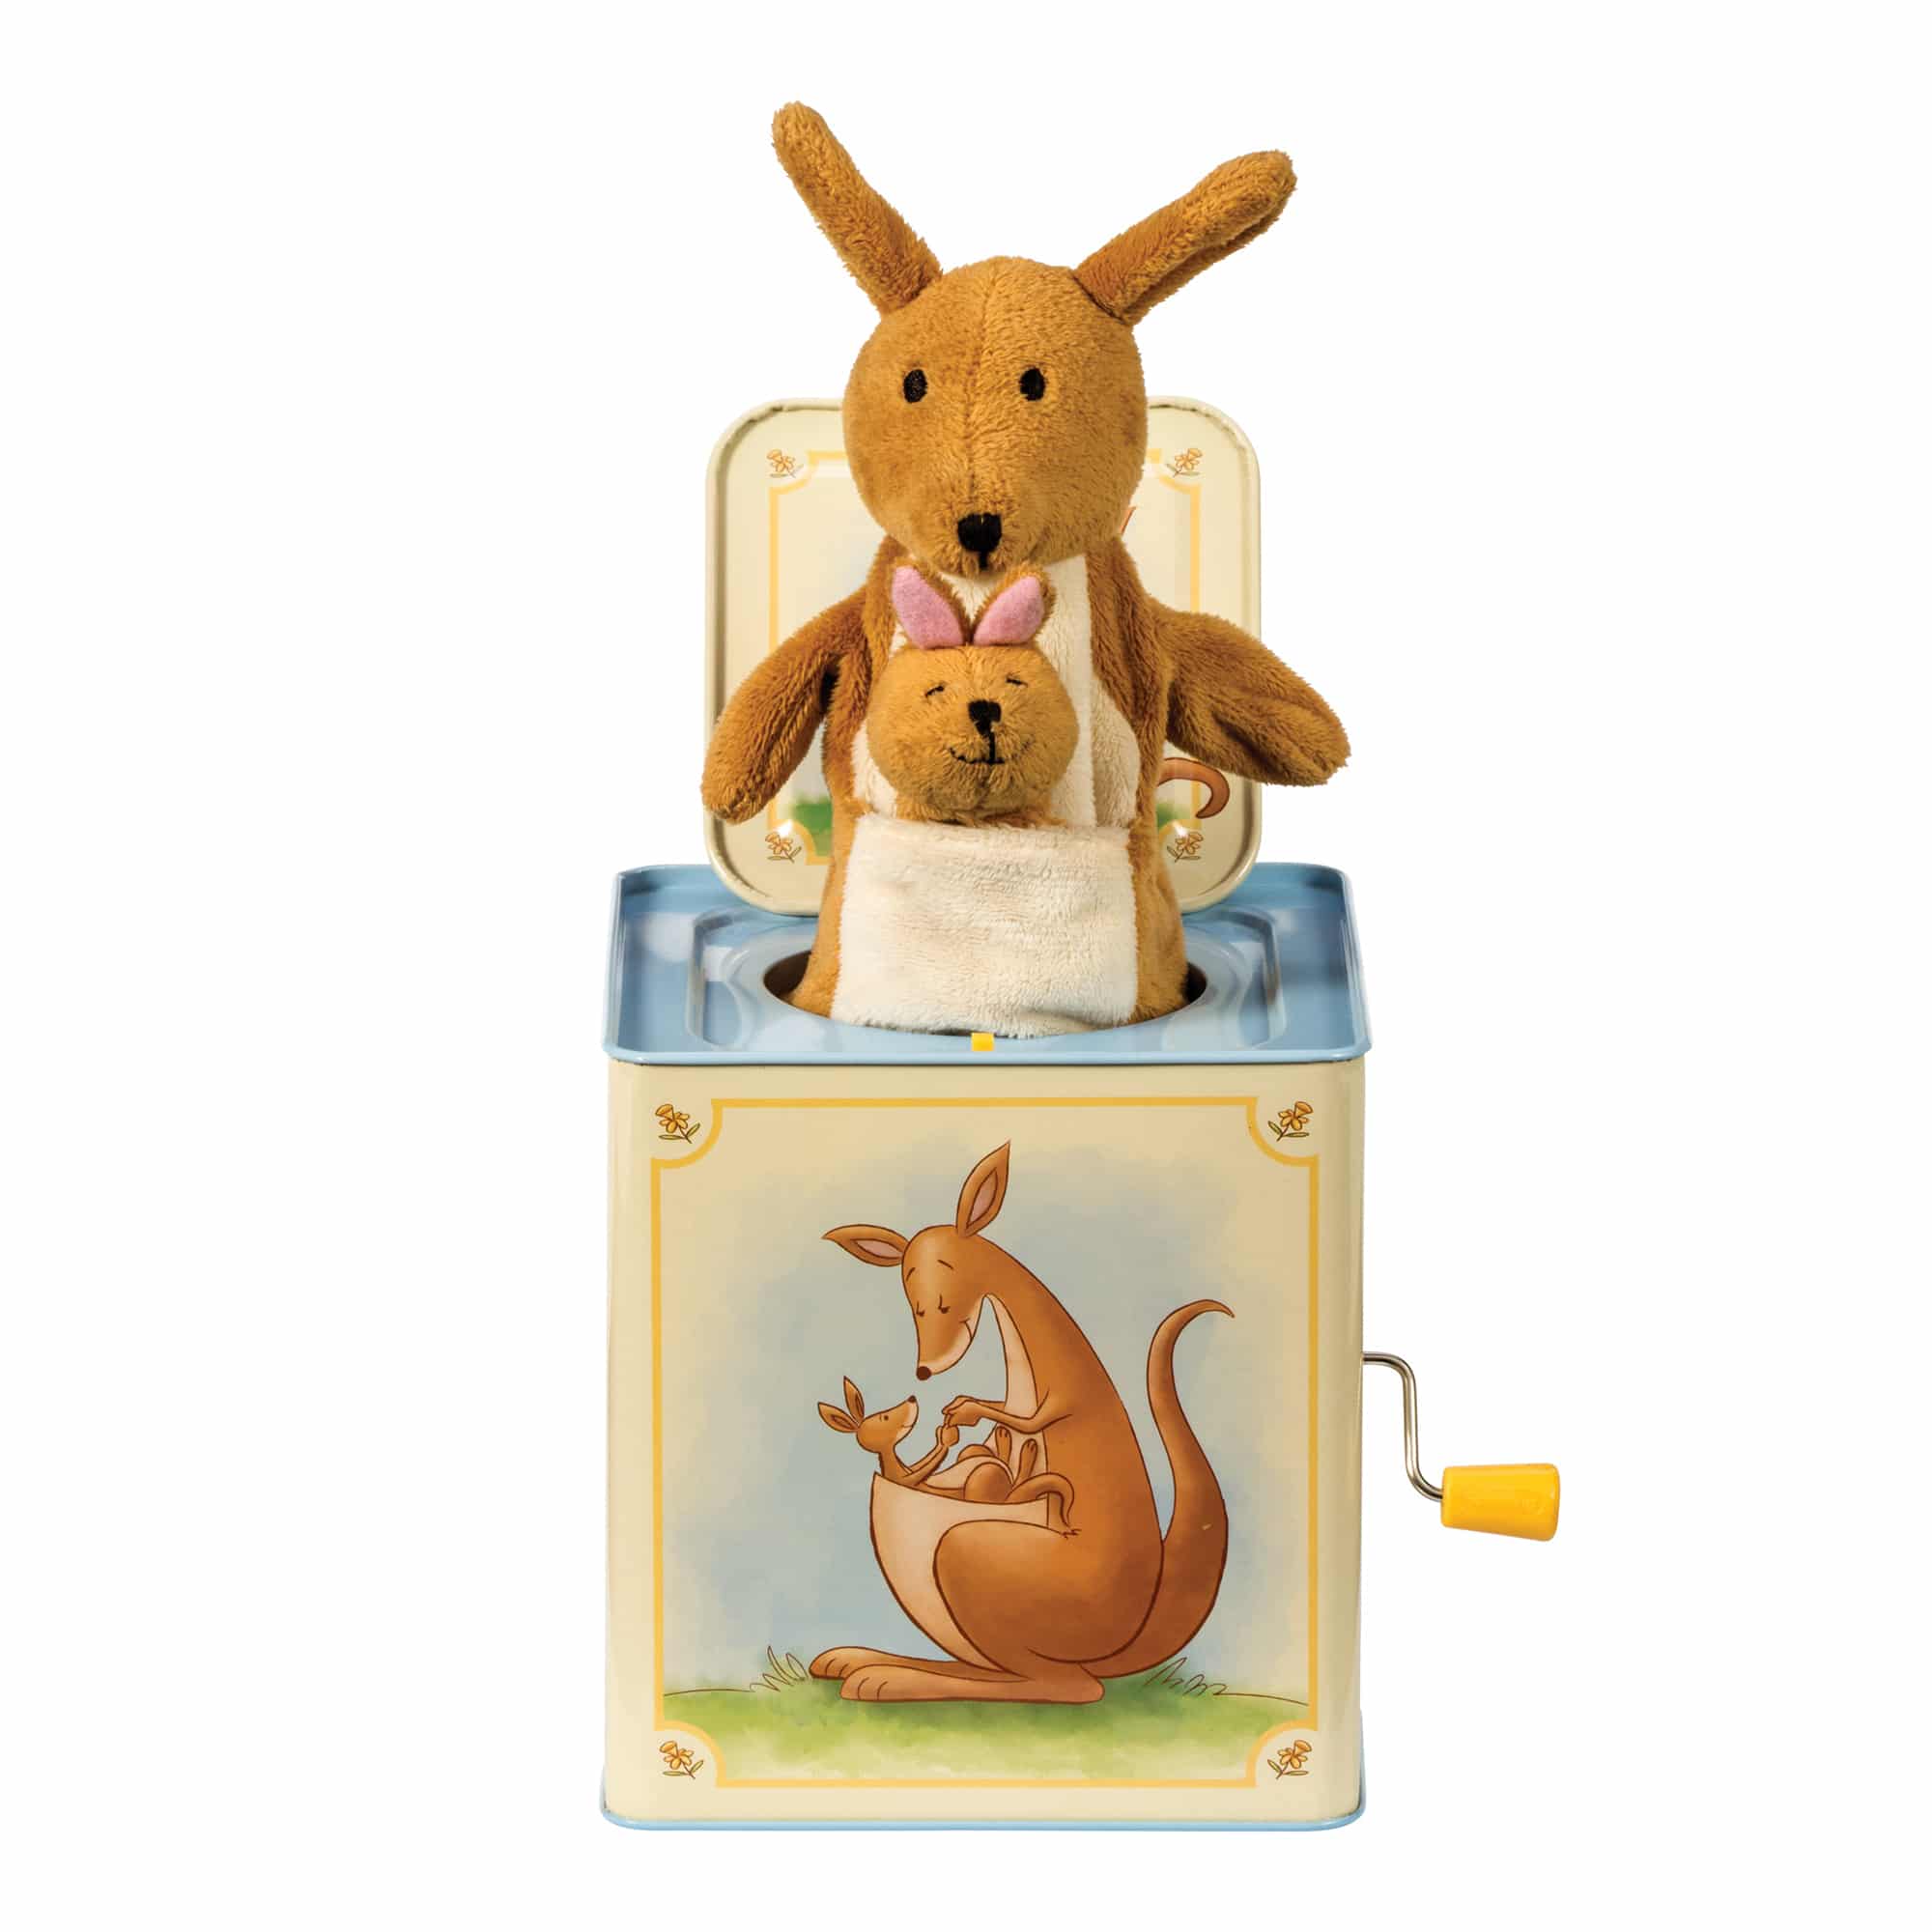 Kangaroo & Baby Too Jack in the Box by Schylling